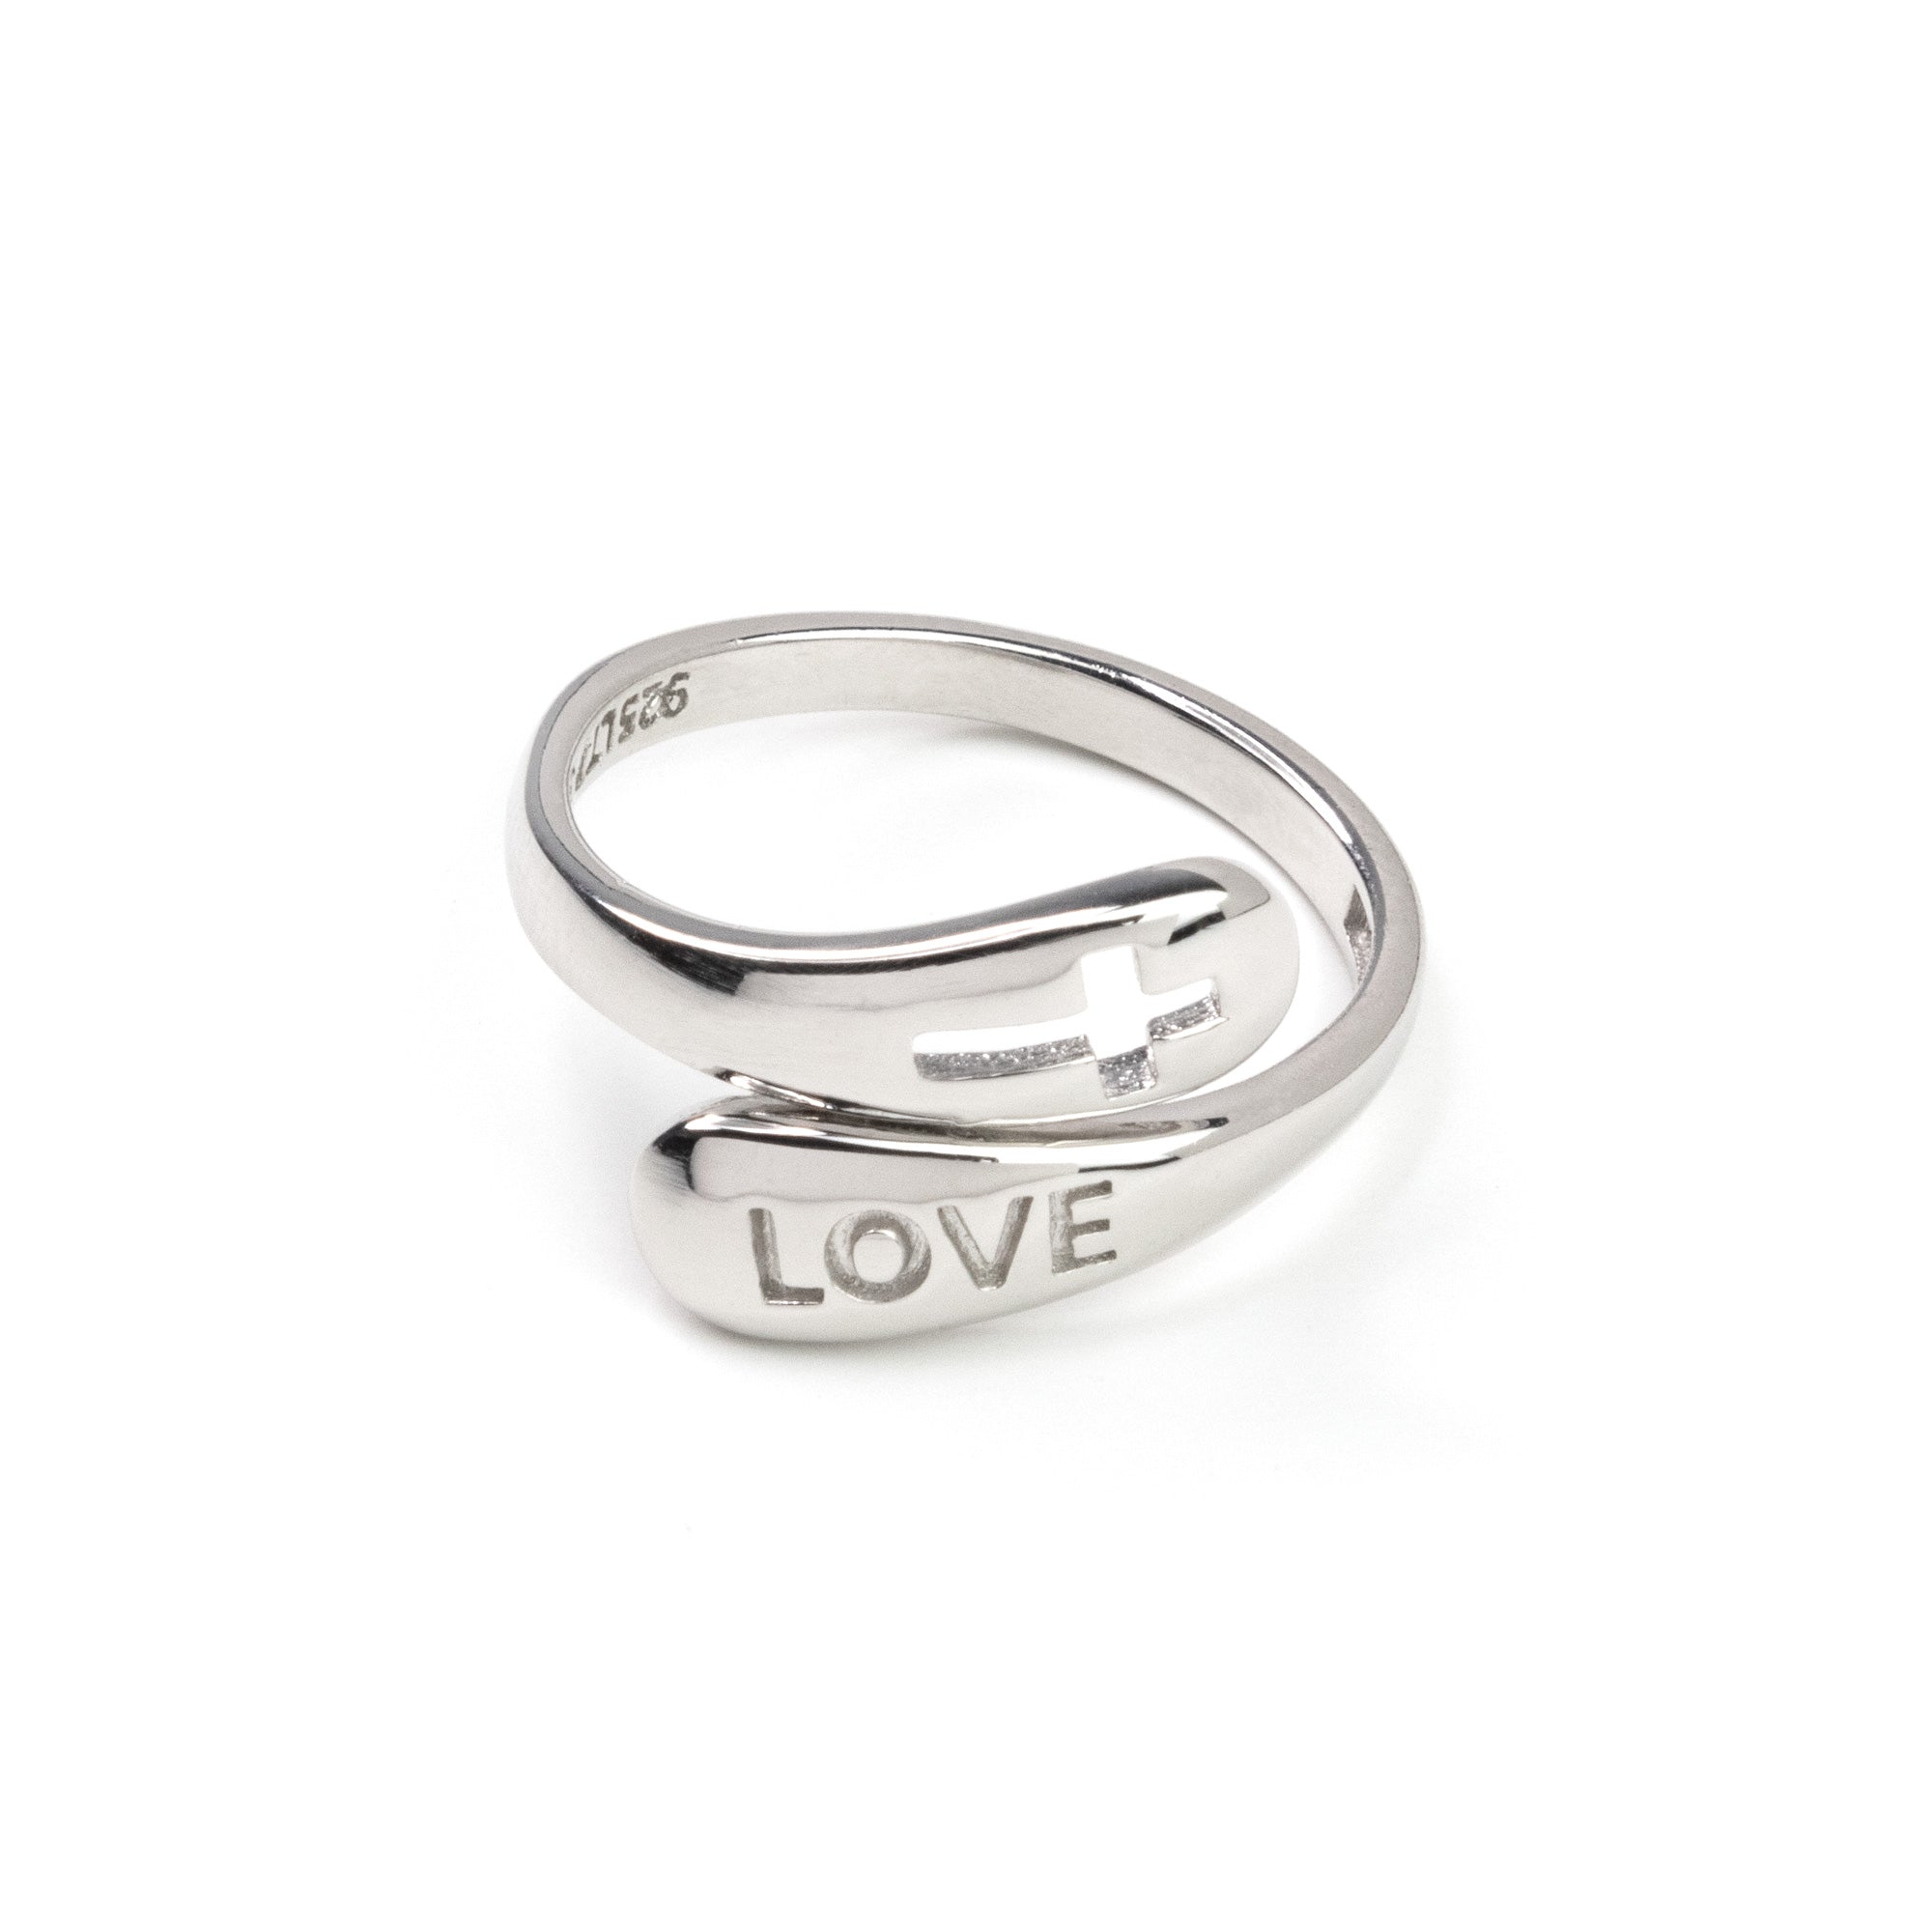 Sterling Silver Wrap Ring - Love and Cut Out Cross, One Size Fits Most